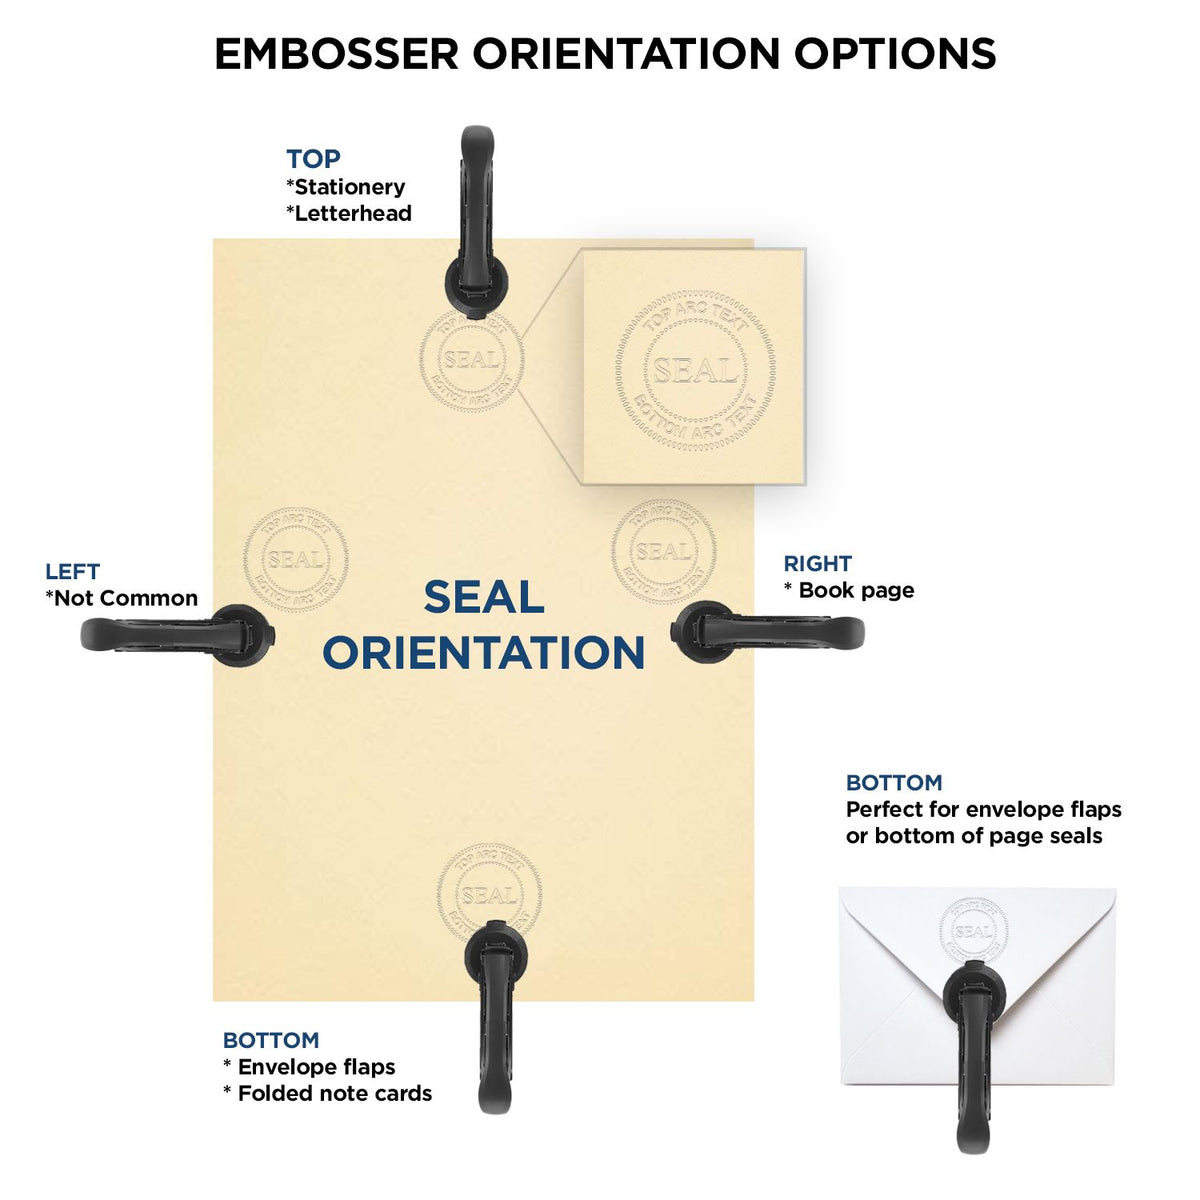 An infographic for the Maine Engineer Desk Seal showing embosser orientation, this is showing examples of a top, bottom, right and left insert.